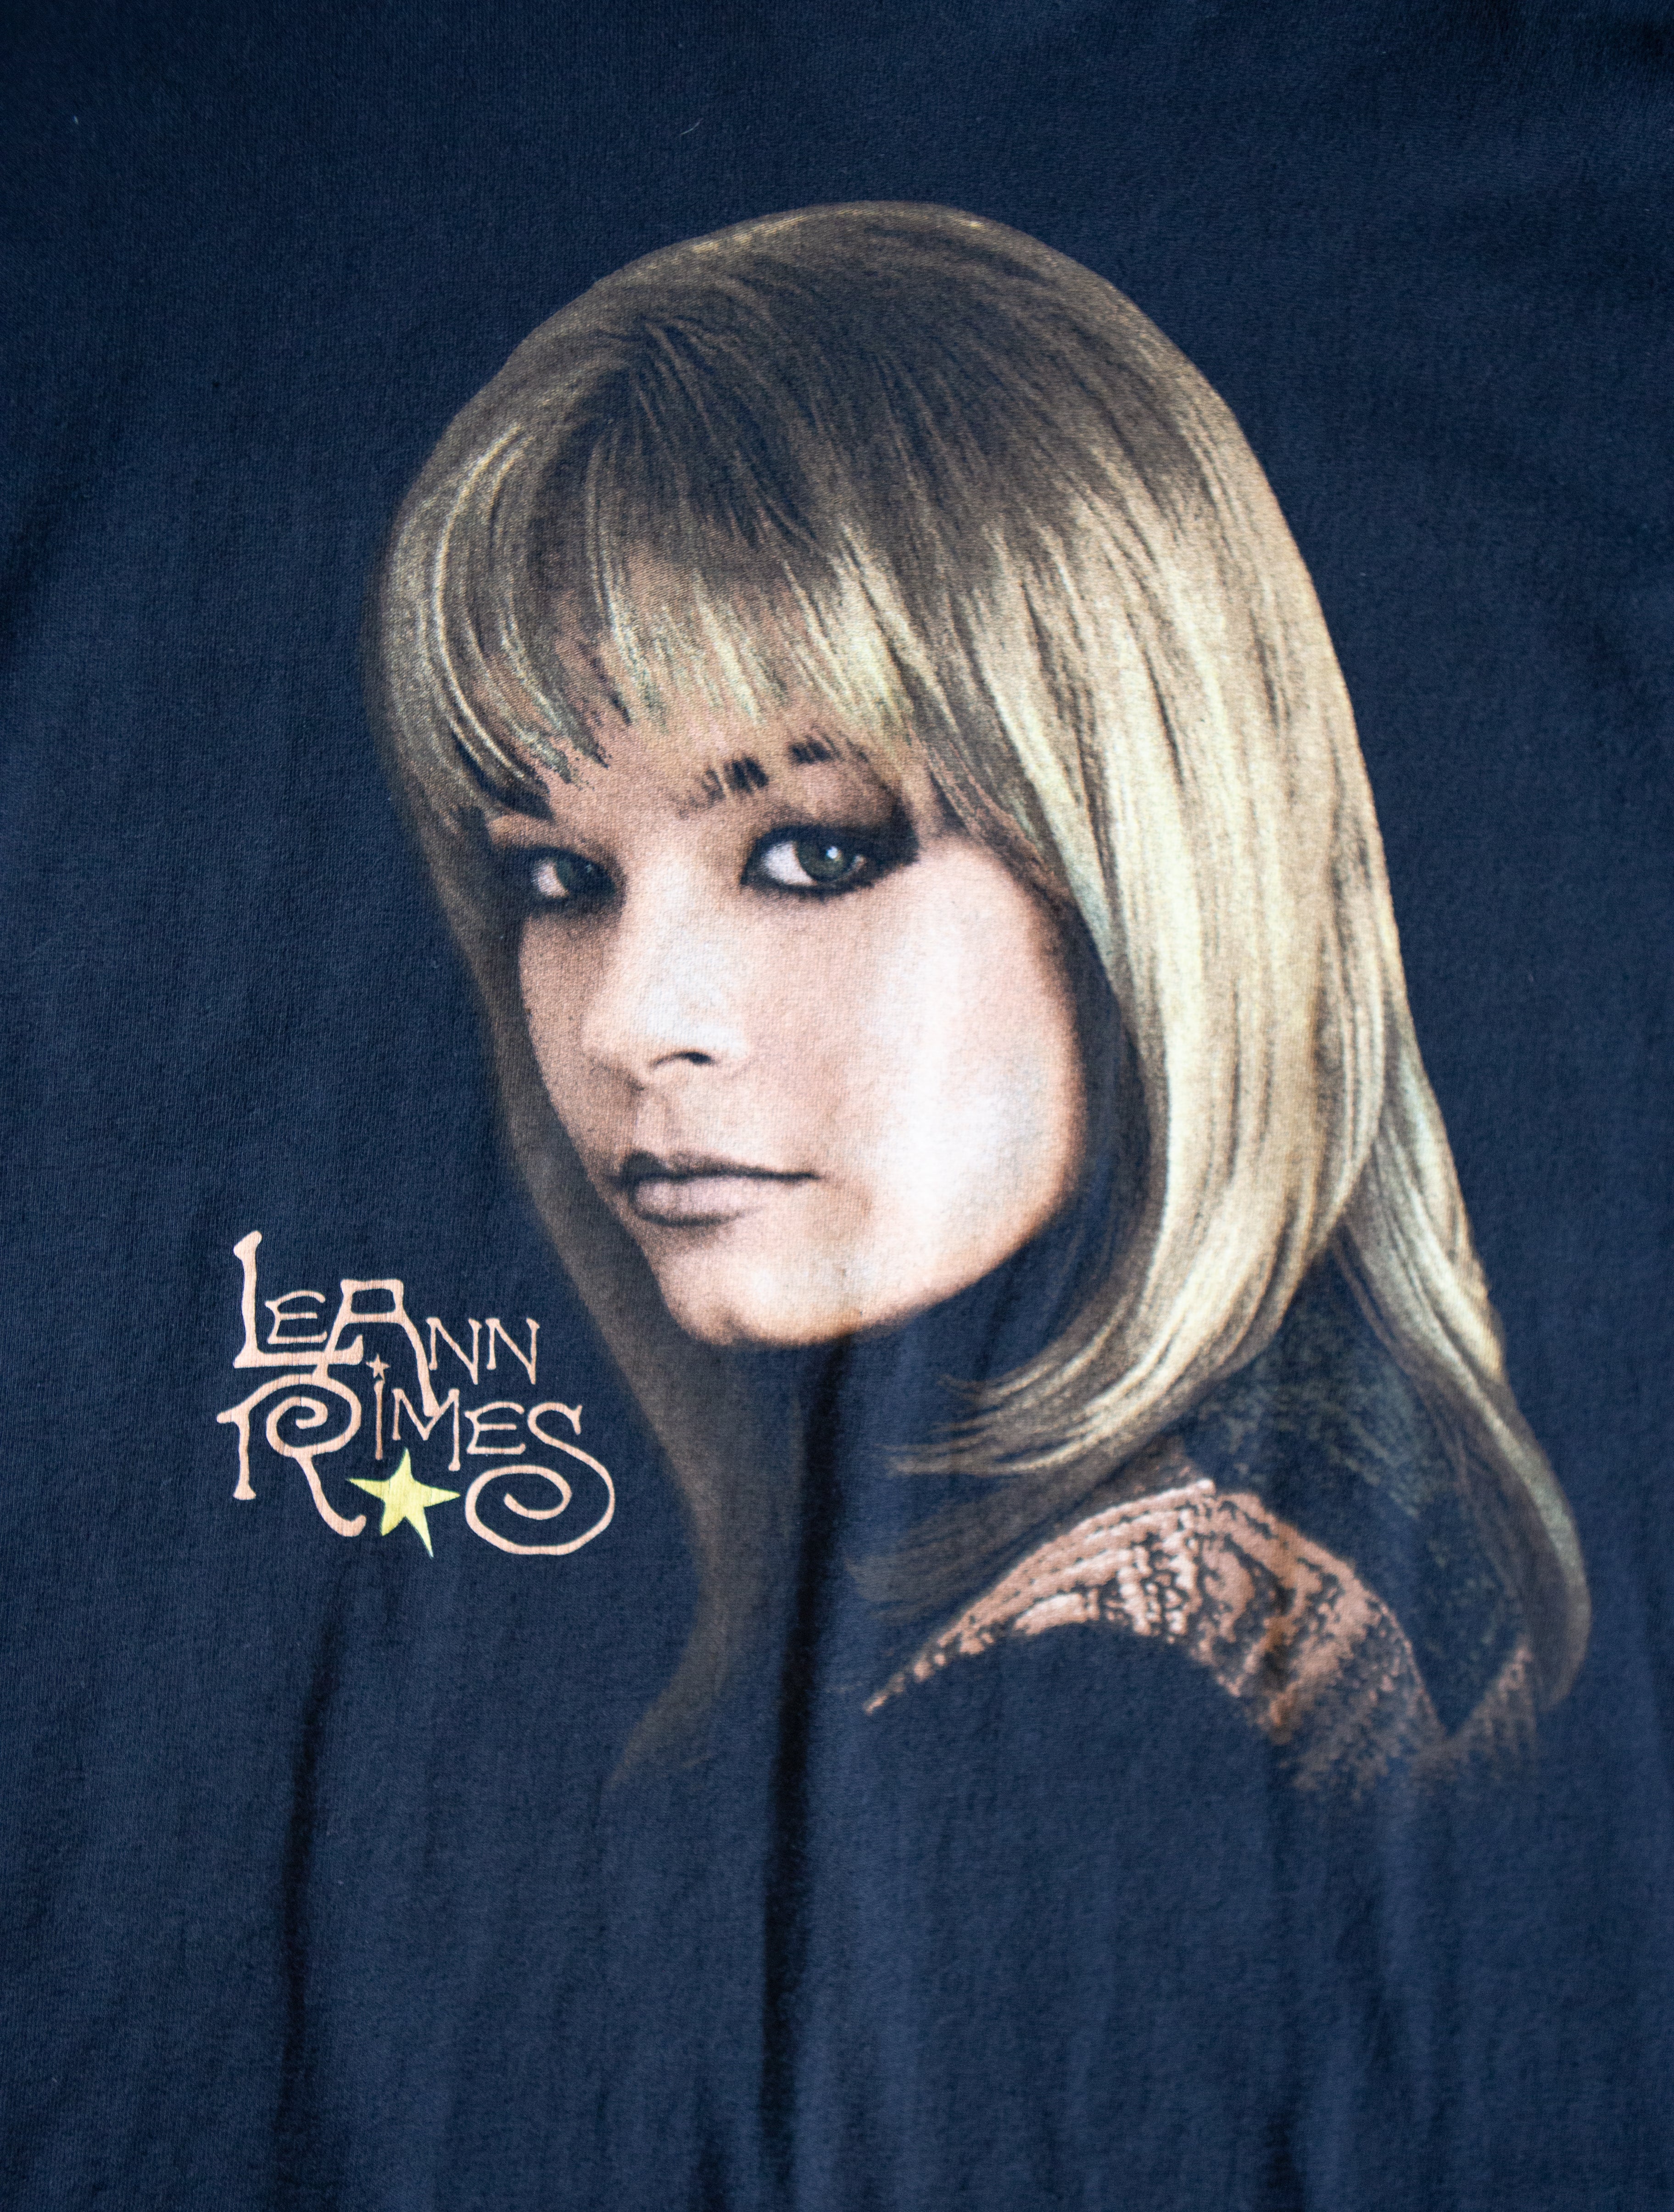 LeAnn Rimes 'Something To Talk About' Tee (1998)